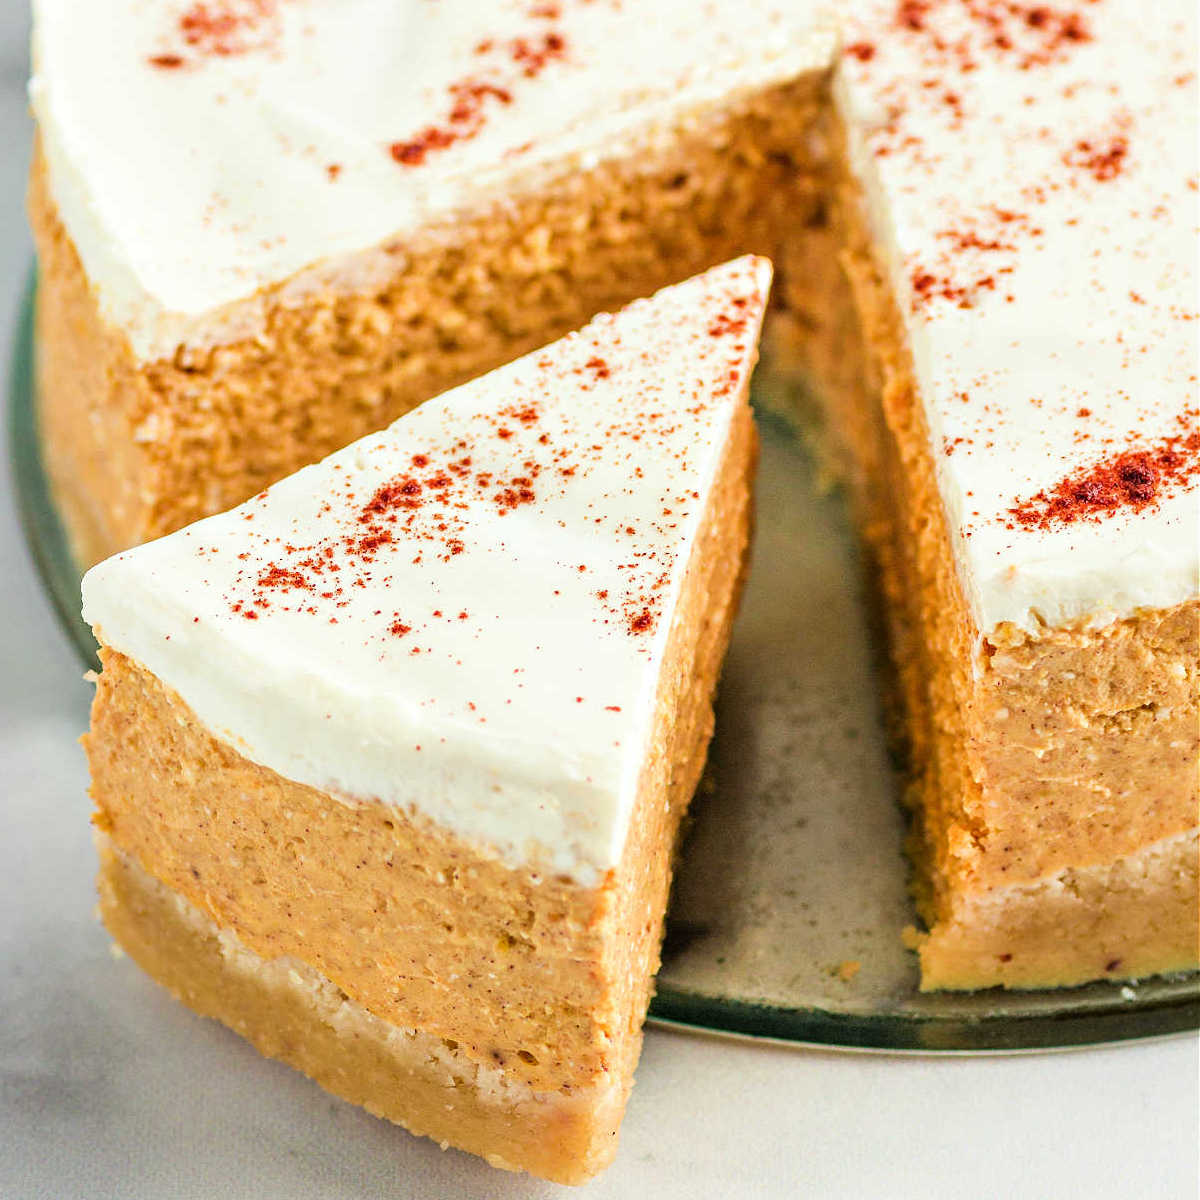 A slice of keto pumpkin cheesecake coming out of a whole cheesecake.